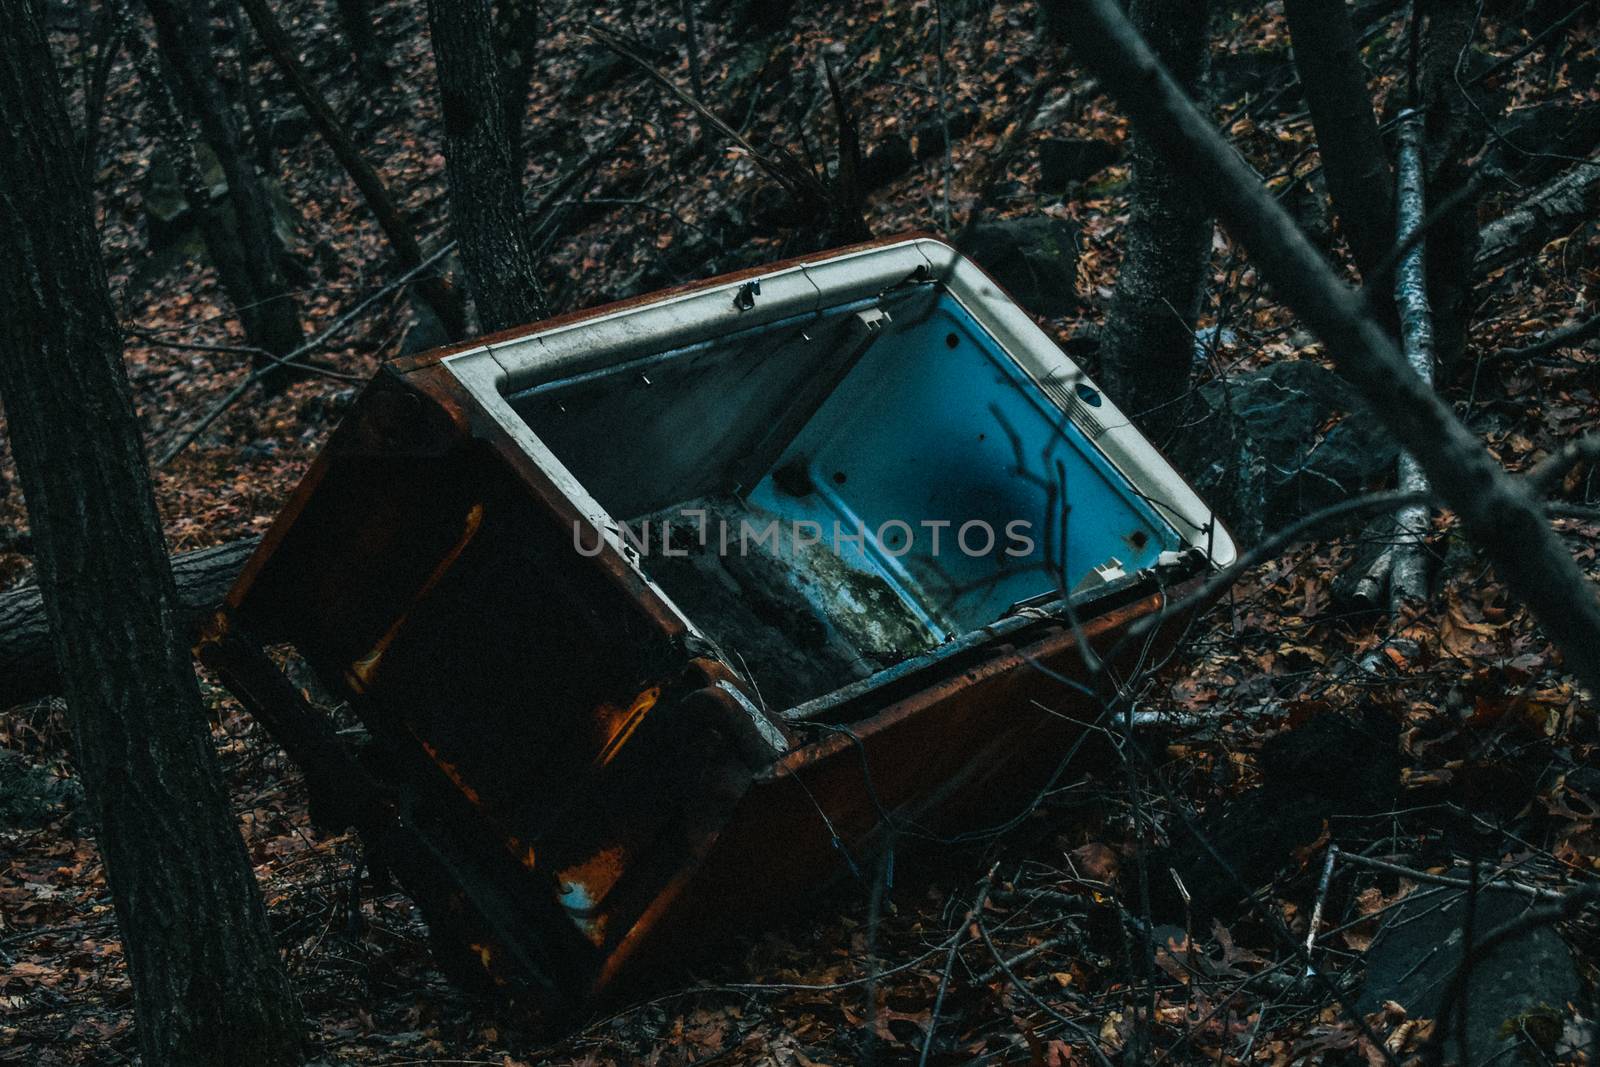 An Abandoned Vintage Refridgerator Forgotten in the Woods by bju12290